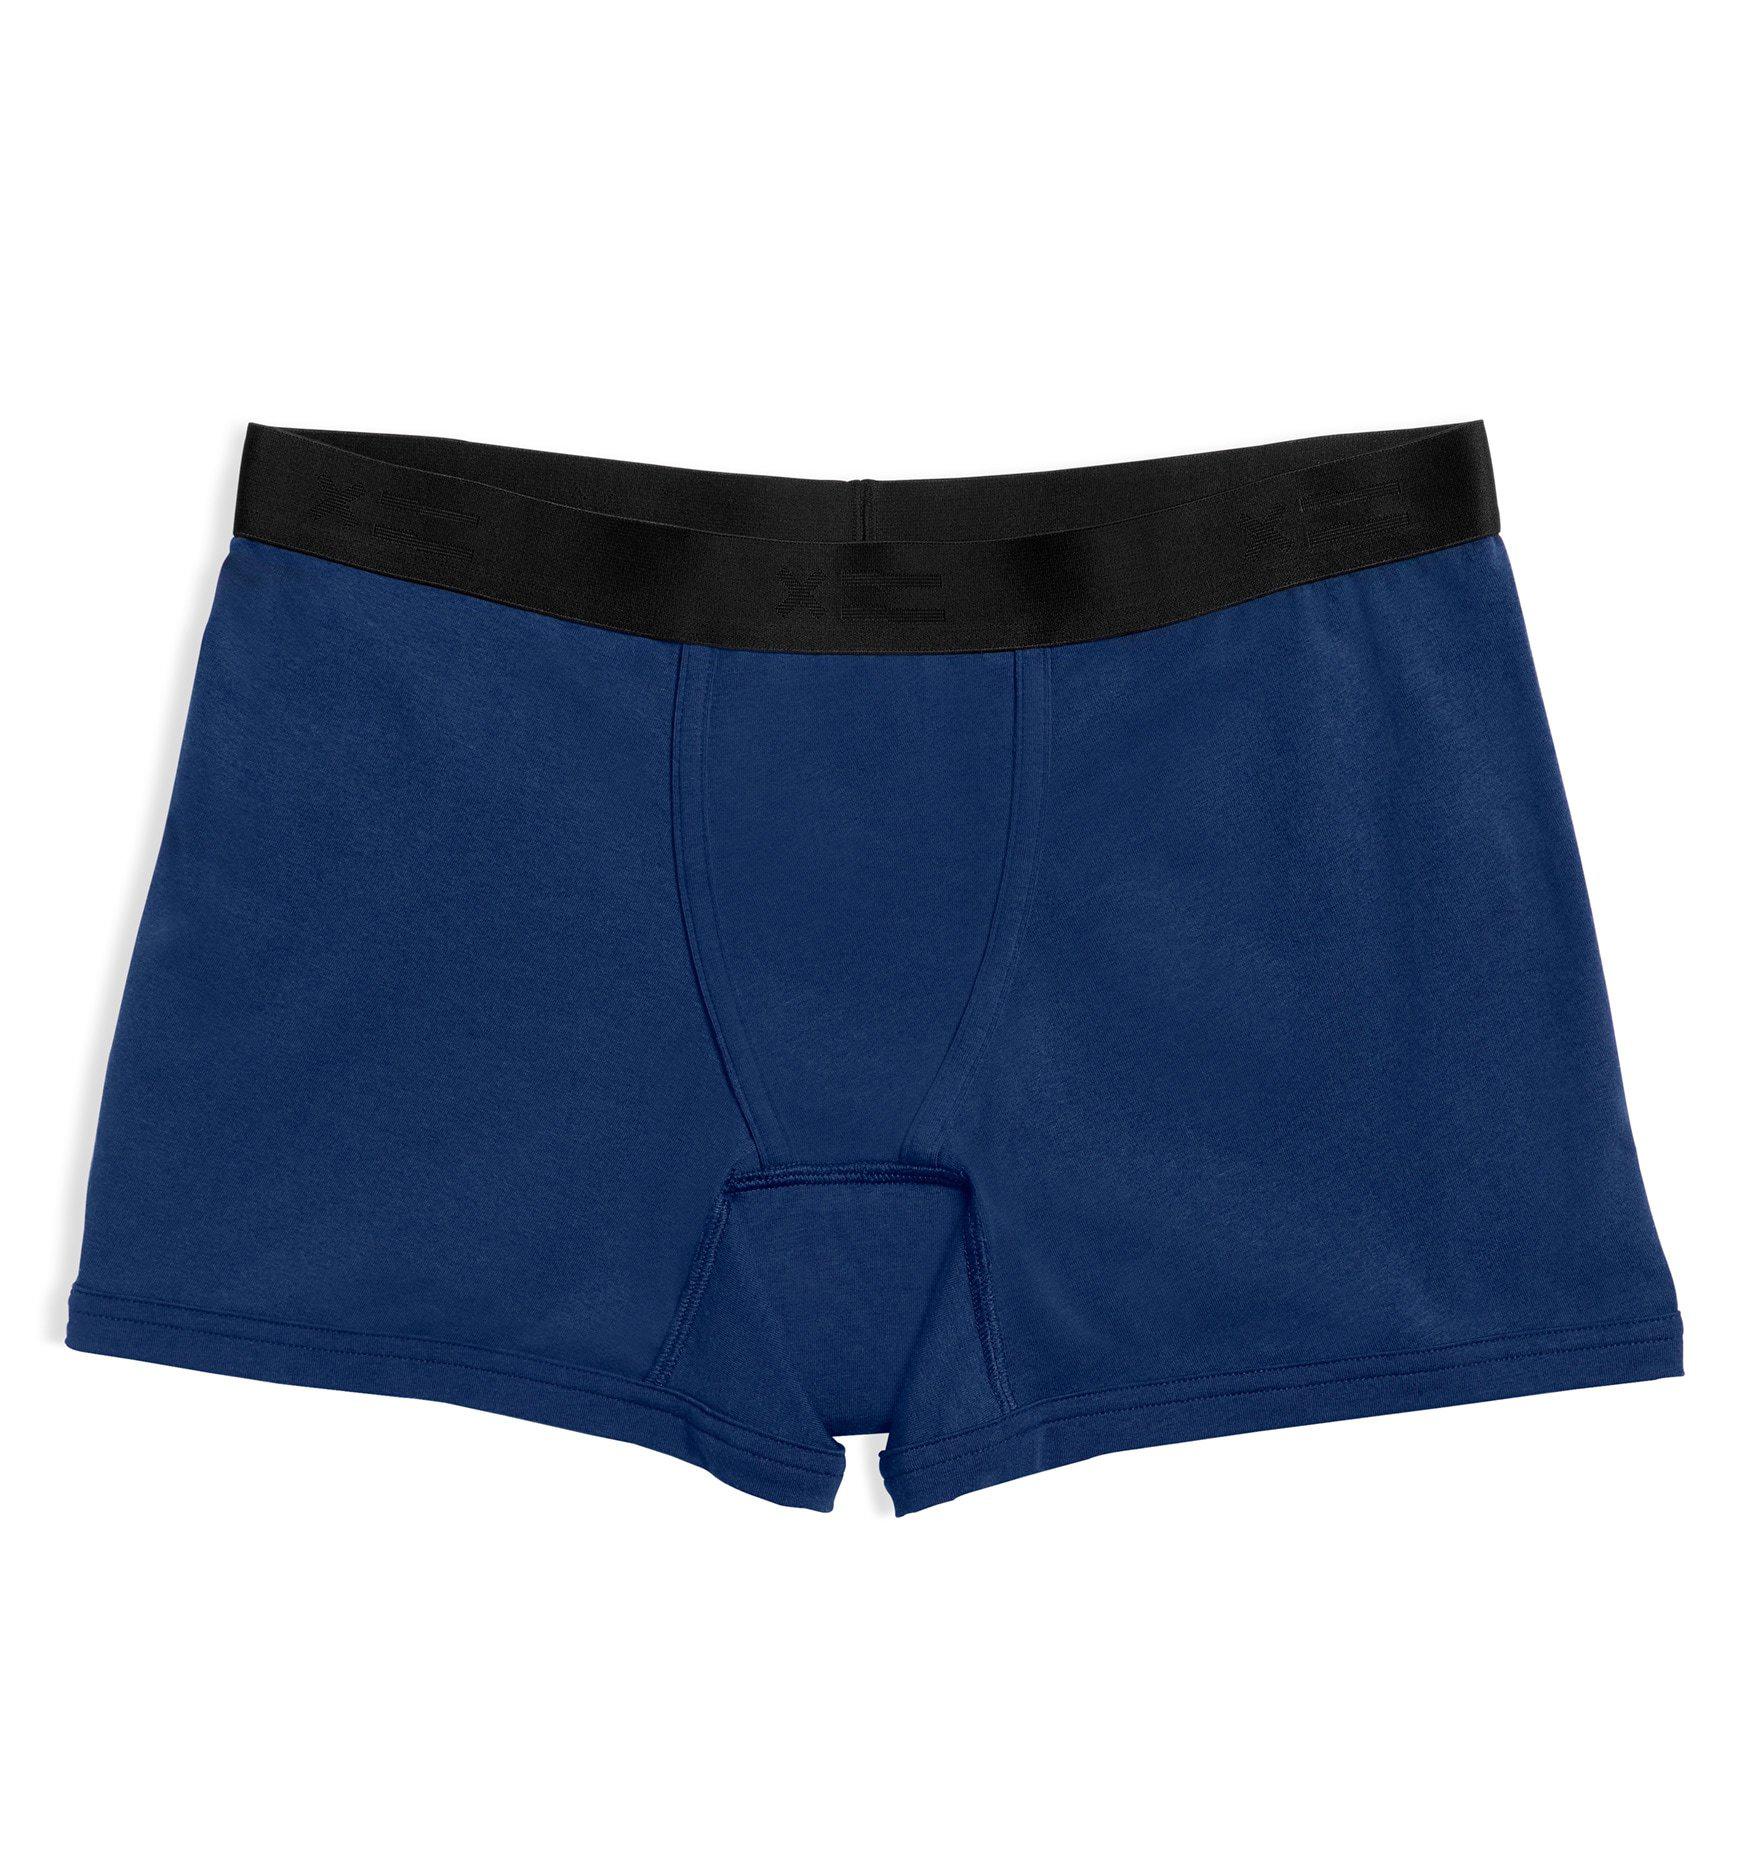 Tomboyx First Line Period Leakproof 9 Inseam Boxer Briefs